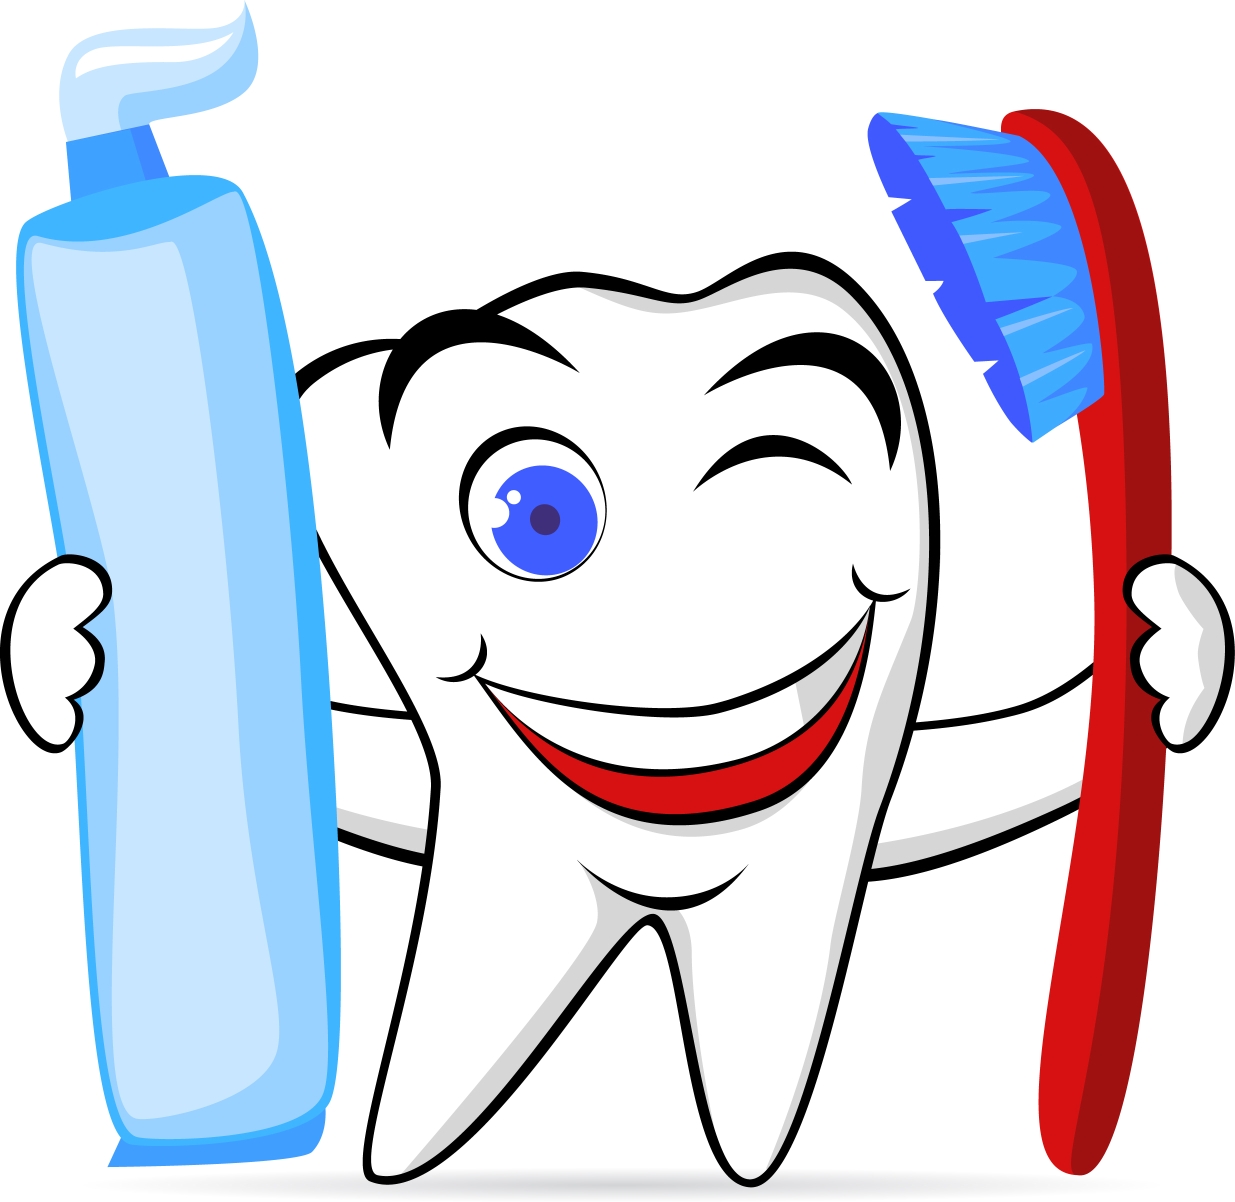 Tooth cavities in teeth clipart free clip art images 2 clipartwiz ...